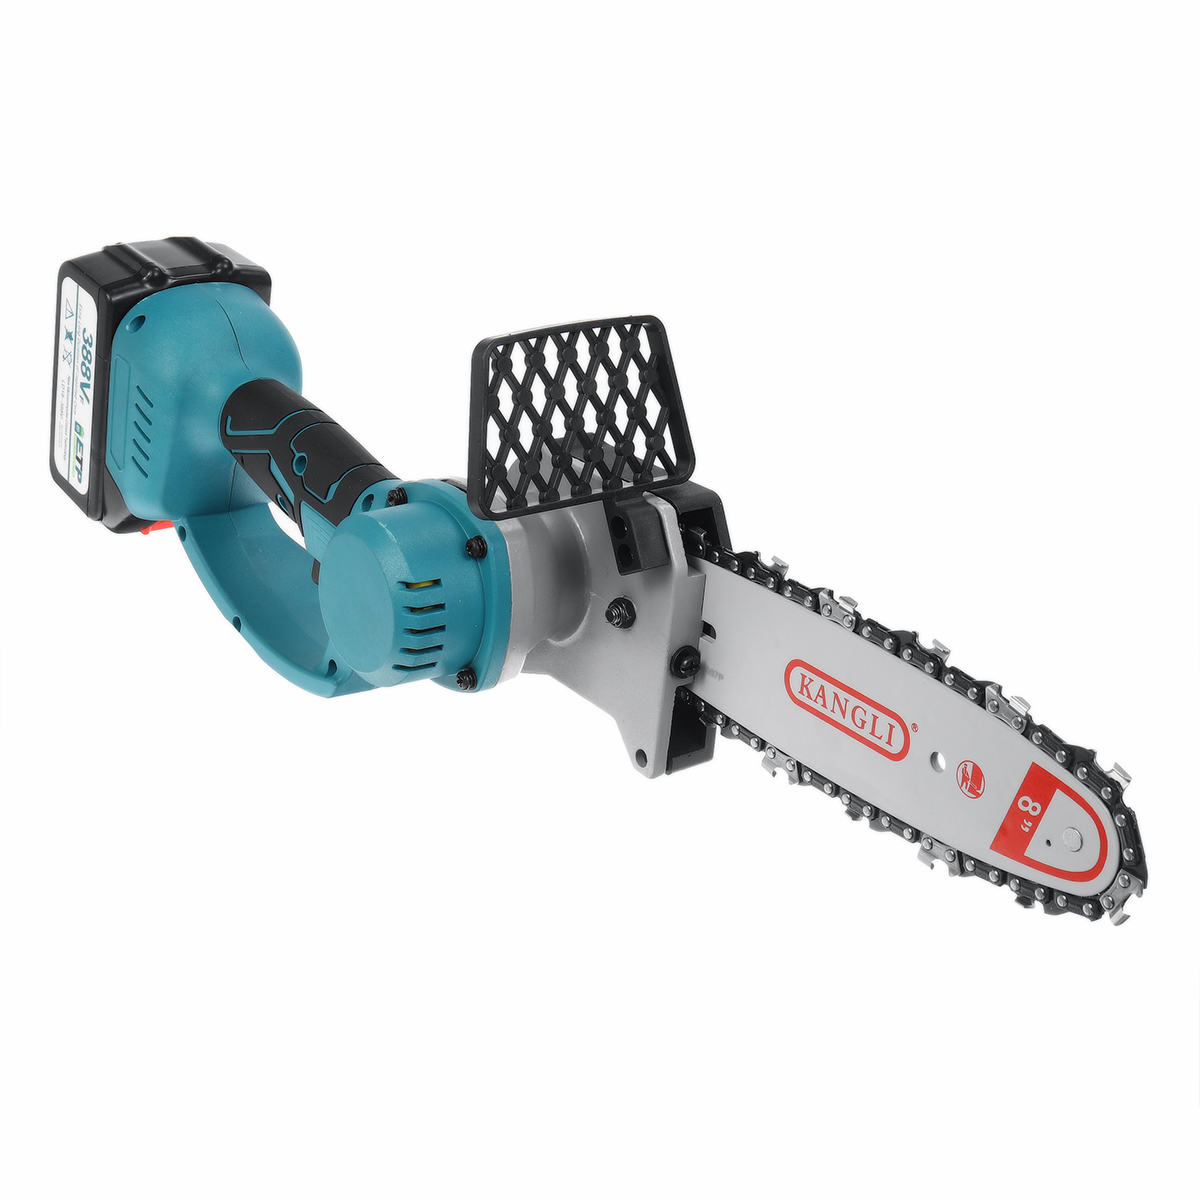 1500W-8inch-Cordless-Electric-Chain-Saw-Brushless-Motor-Power-Tools-Rechargeable-Lithium-Battery-1805588-11